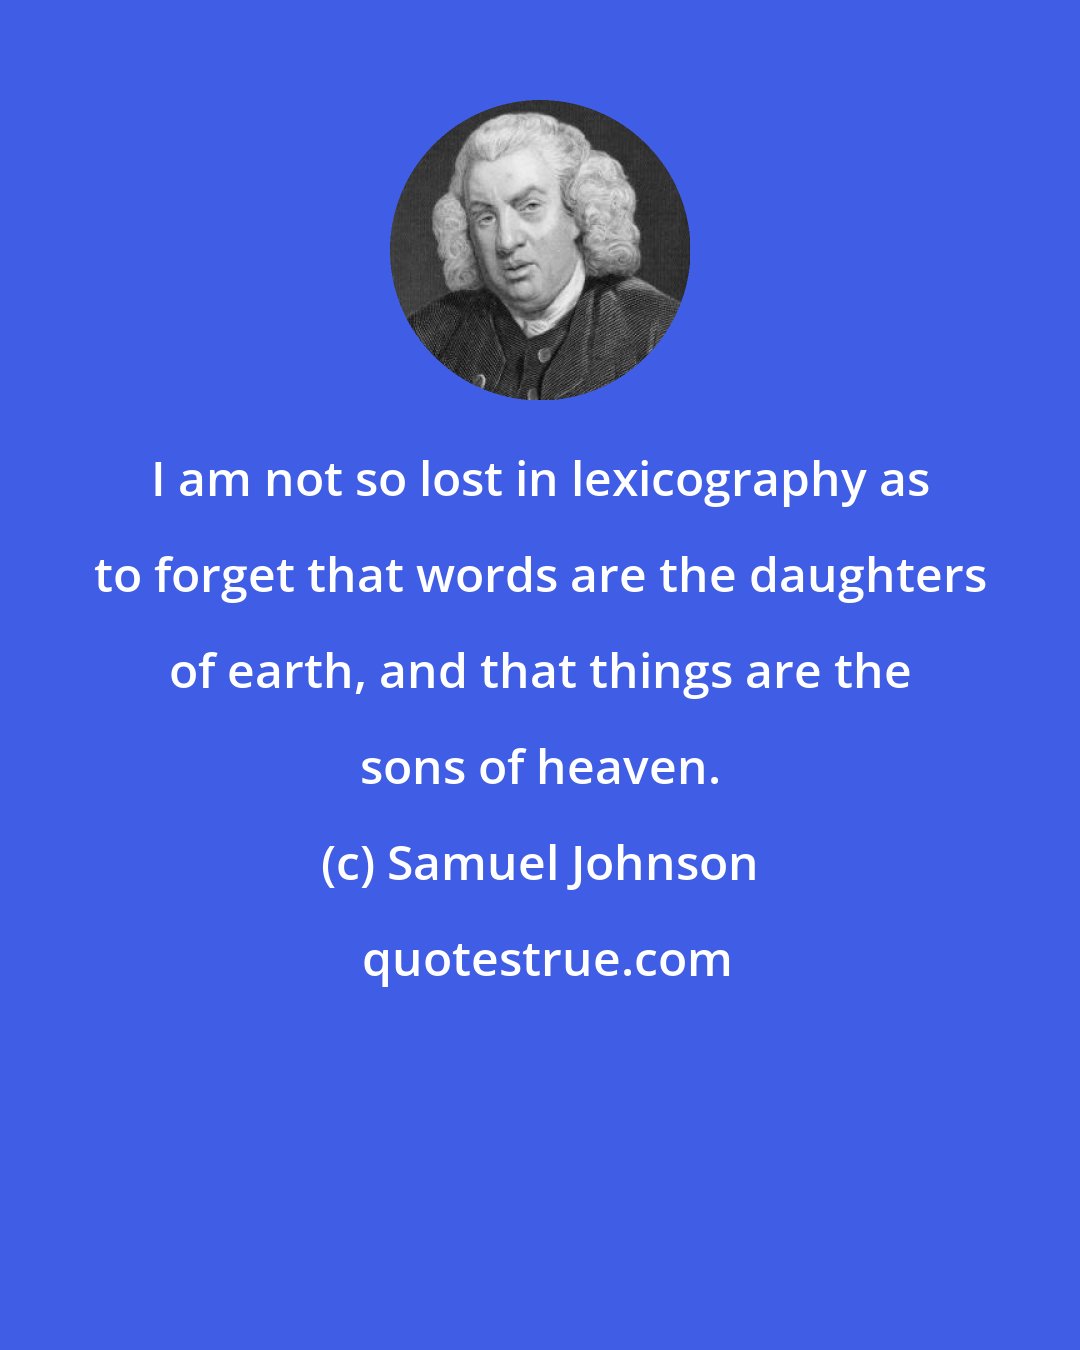 Samuel Johnson: I am not so lost in lexicography as to forget that words are the daughters of earth, and that things are the sons of heaven.